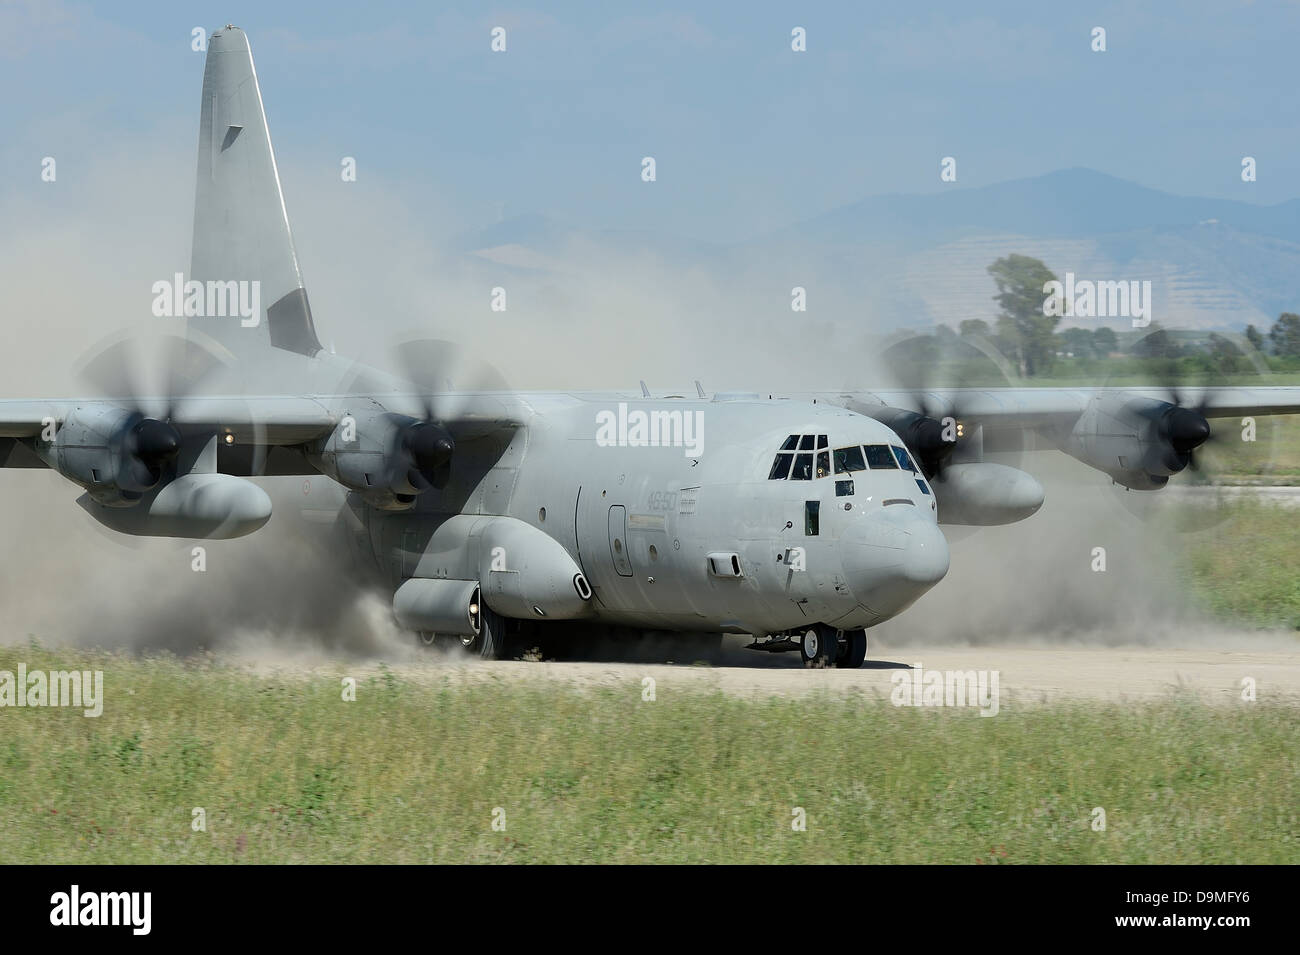 May 9, 2013 - A C-130 Hercules of the Italian Air Force landing on an  unpaved landing strip, Grazzanise, Italy Stock Photo - Alamy